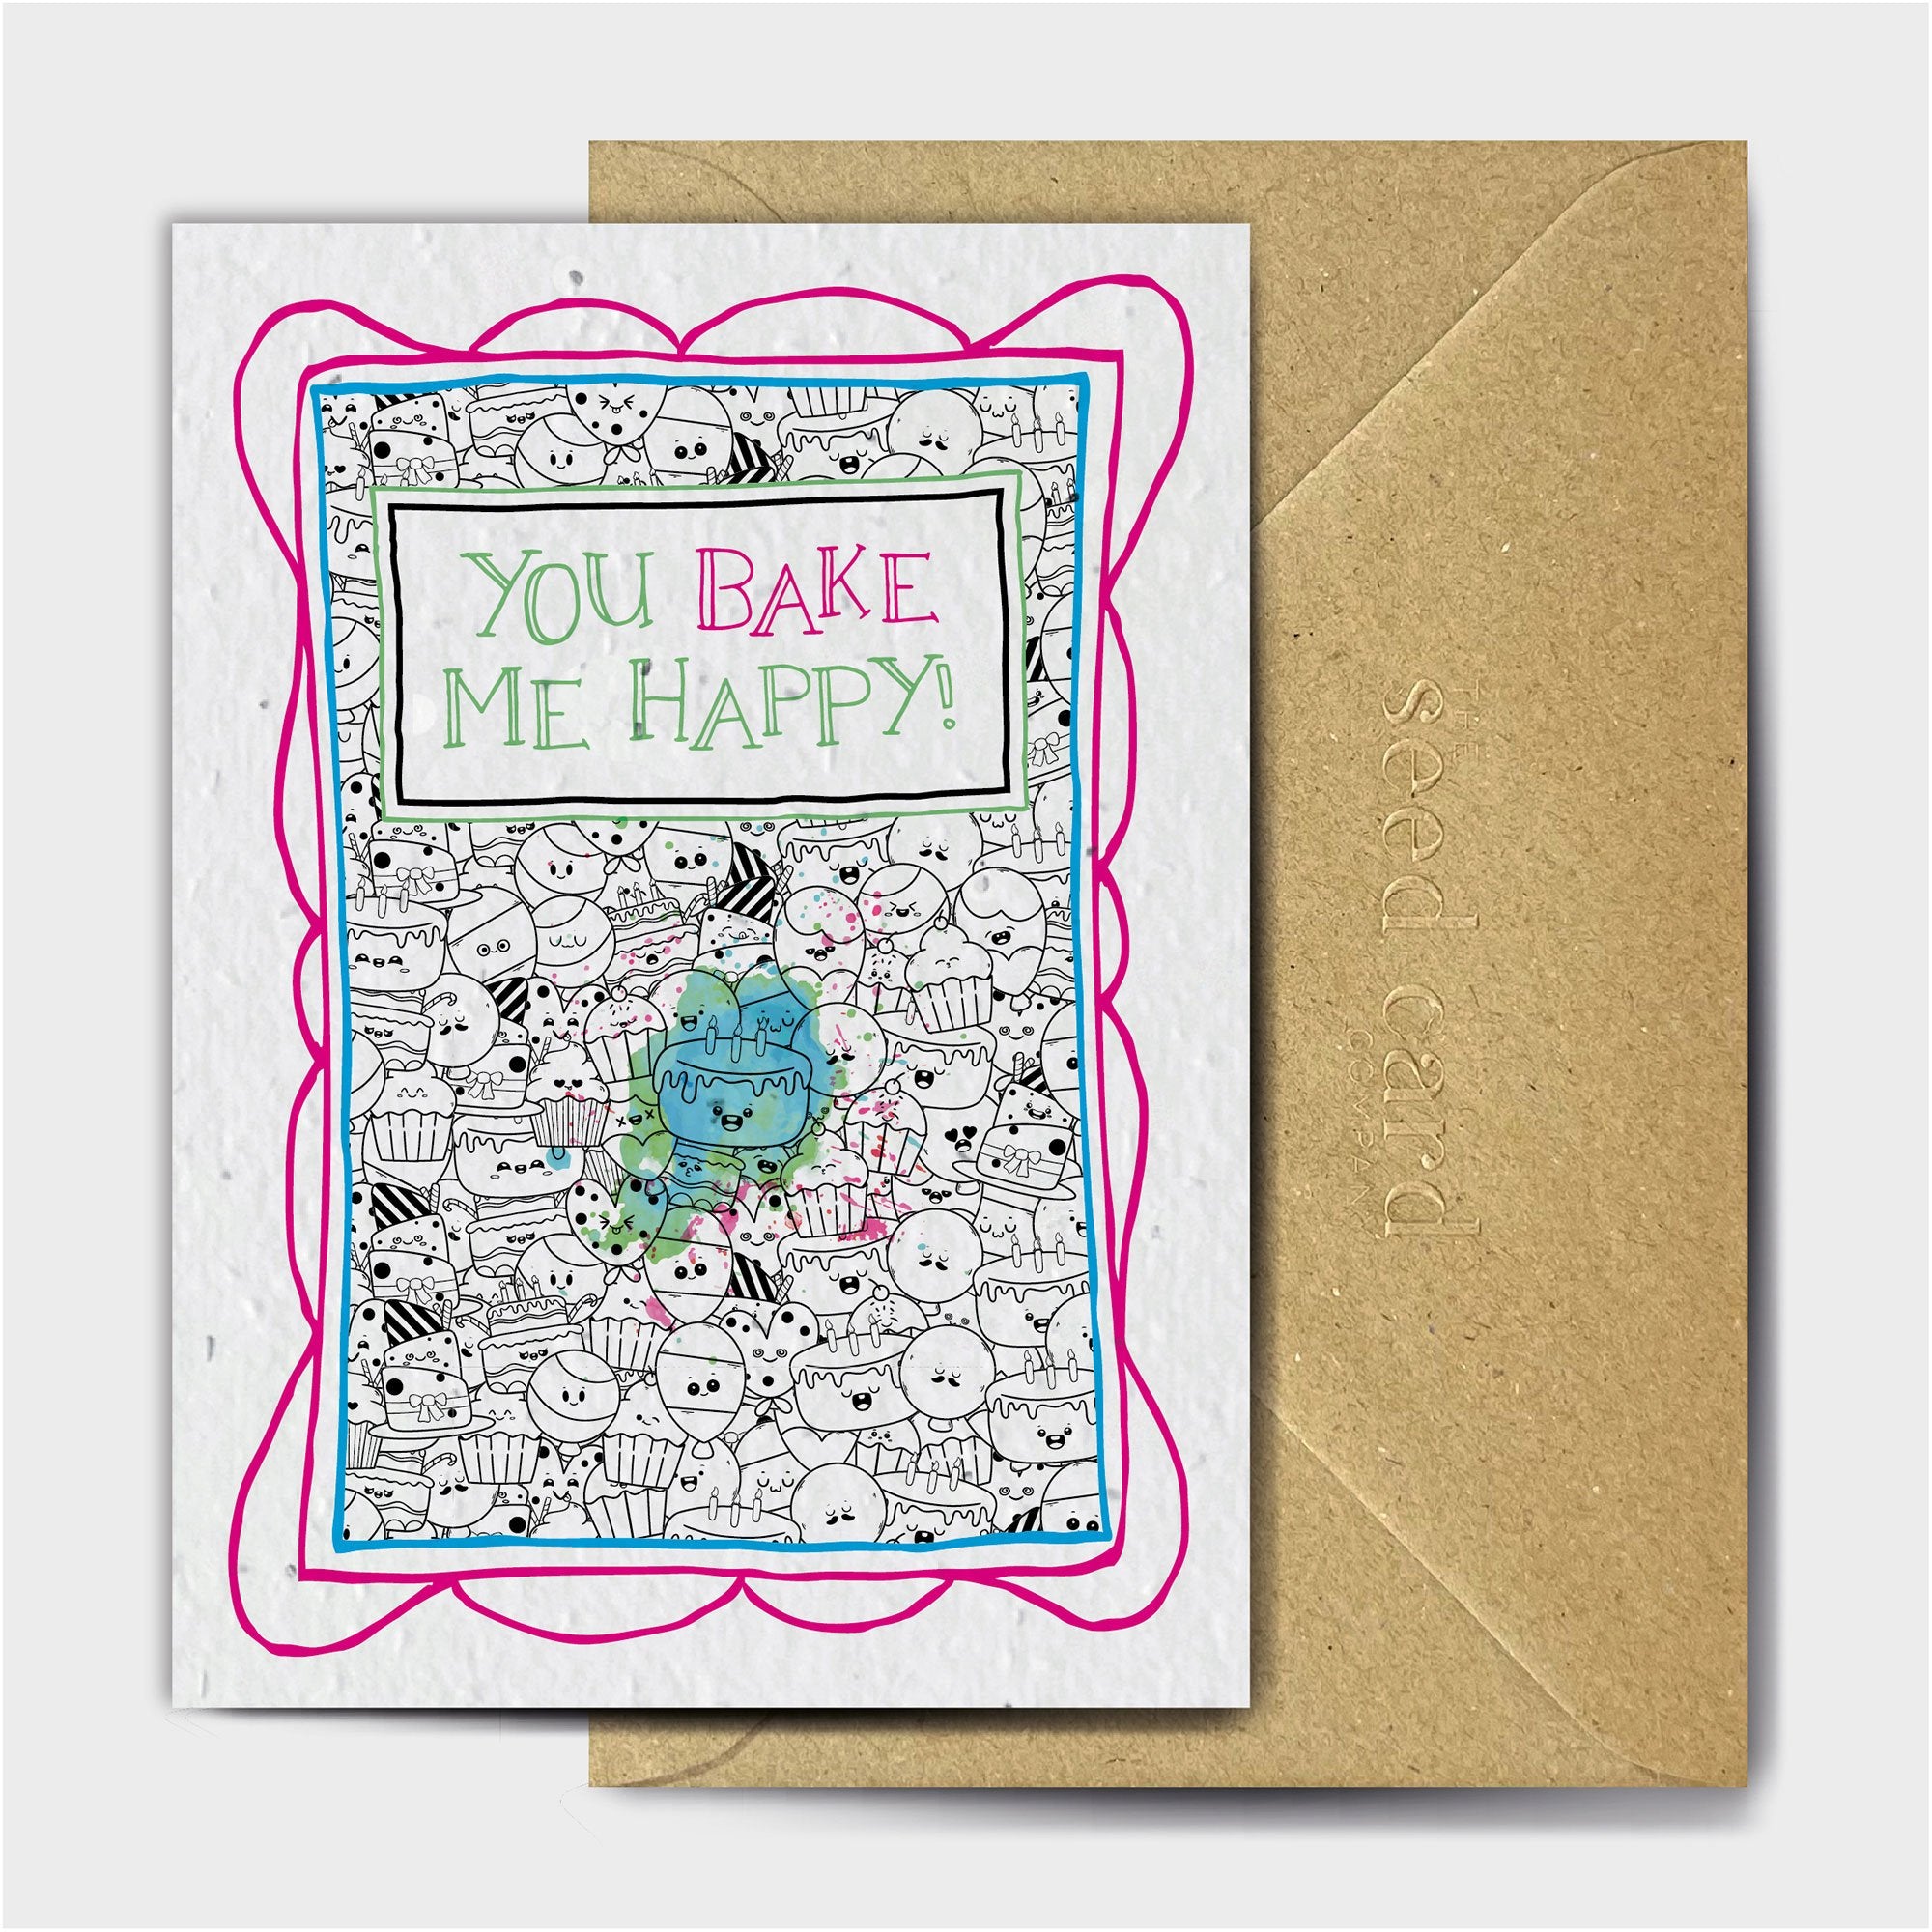 Shop online Bake Me Happy - 100% biodegradable seed-embedded cards Shop -The Seed Card Company